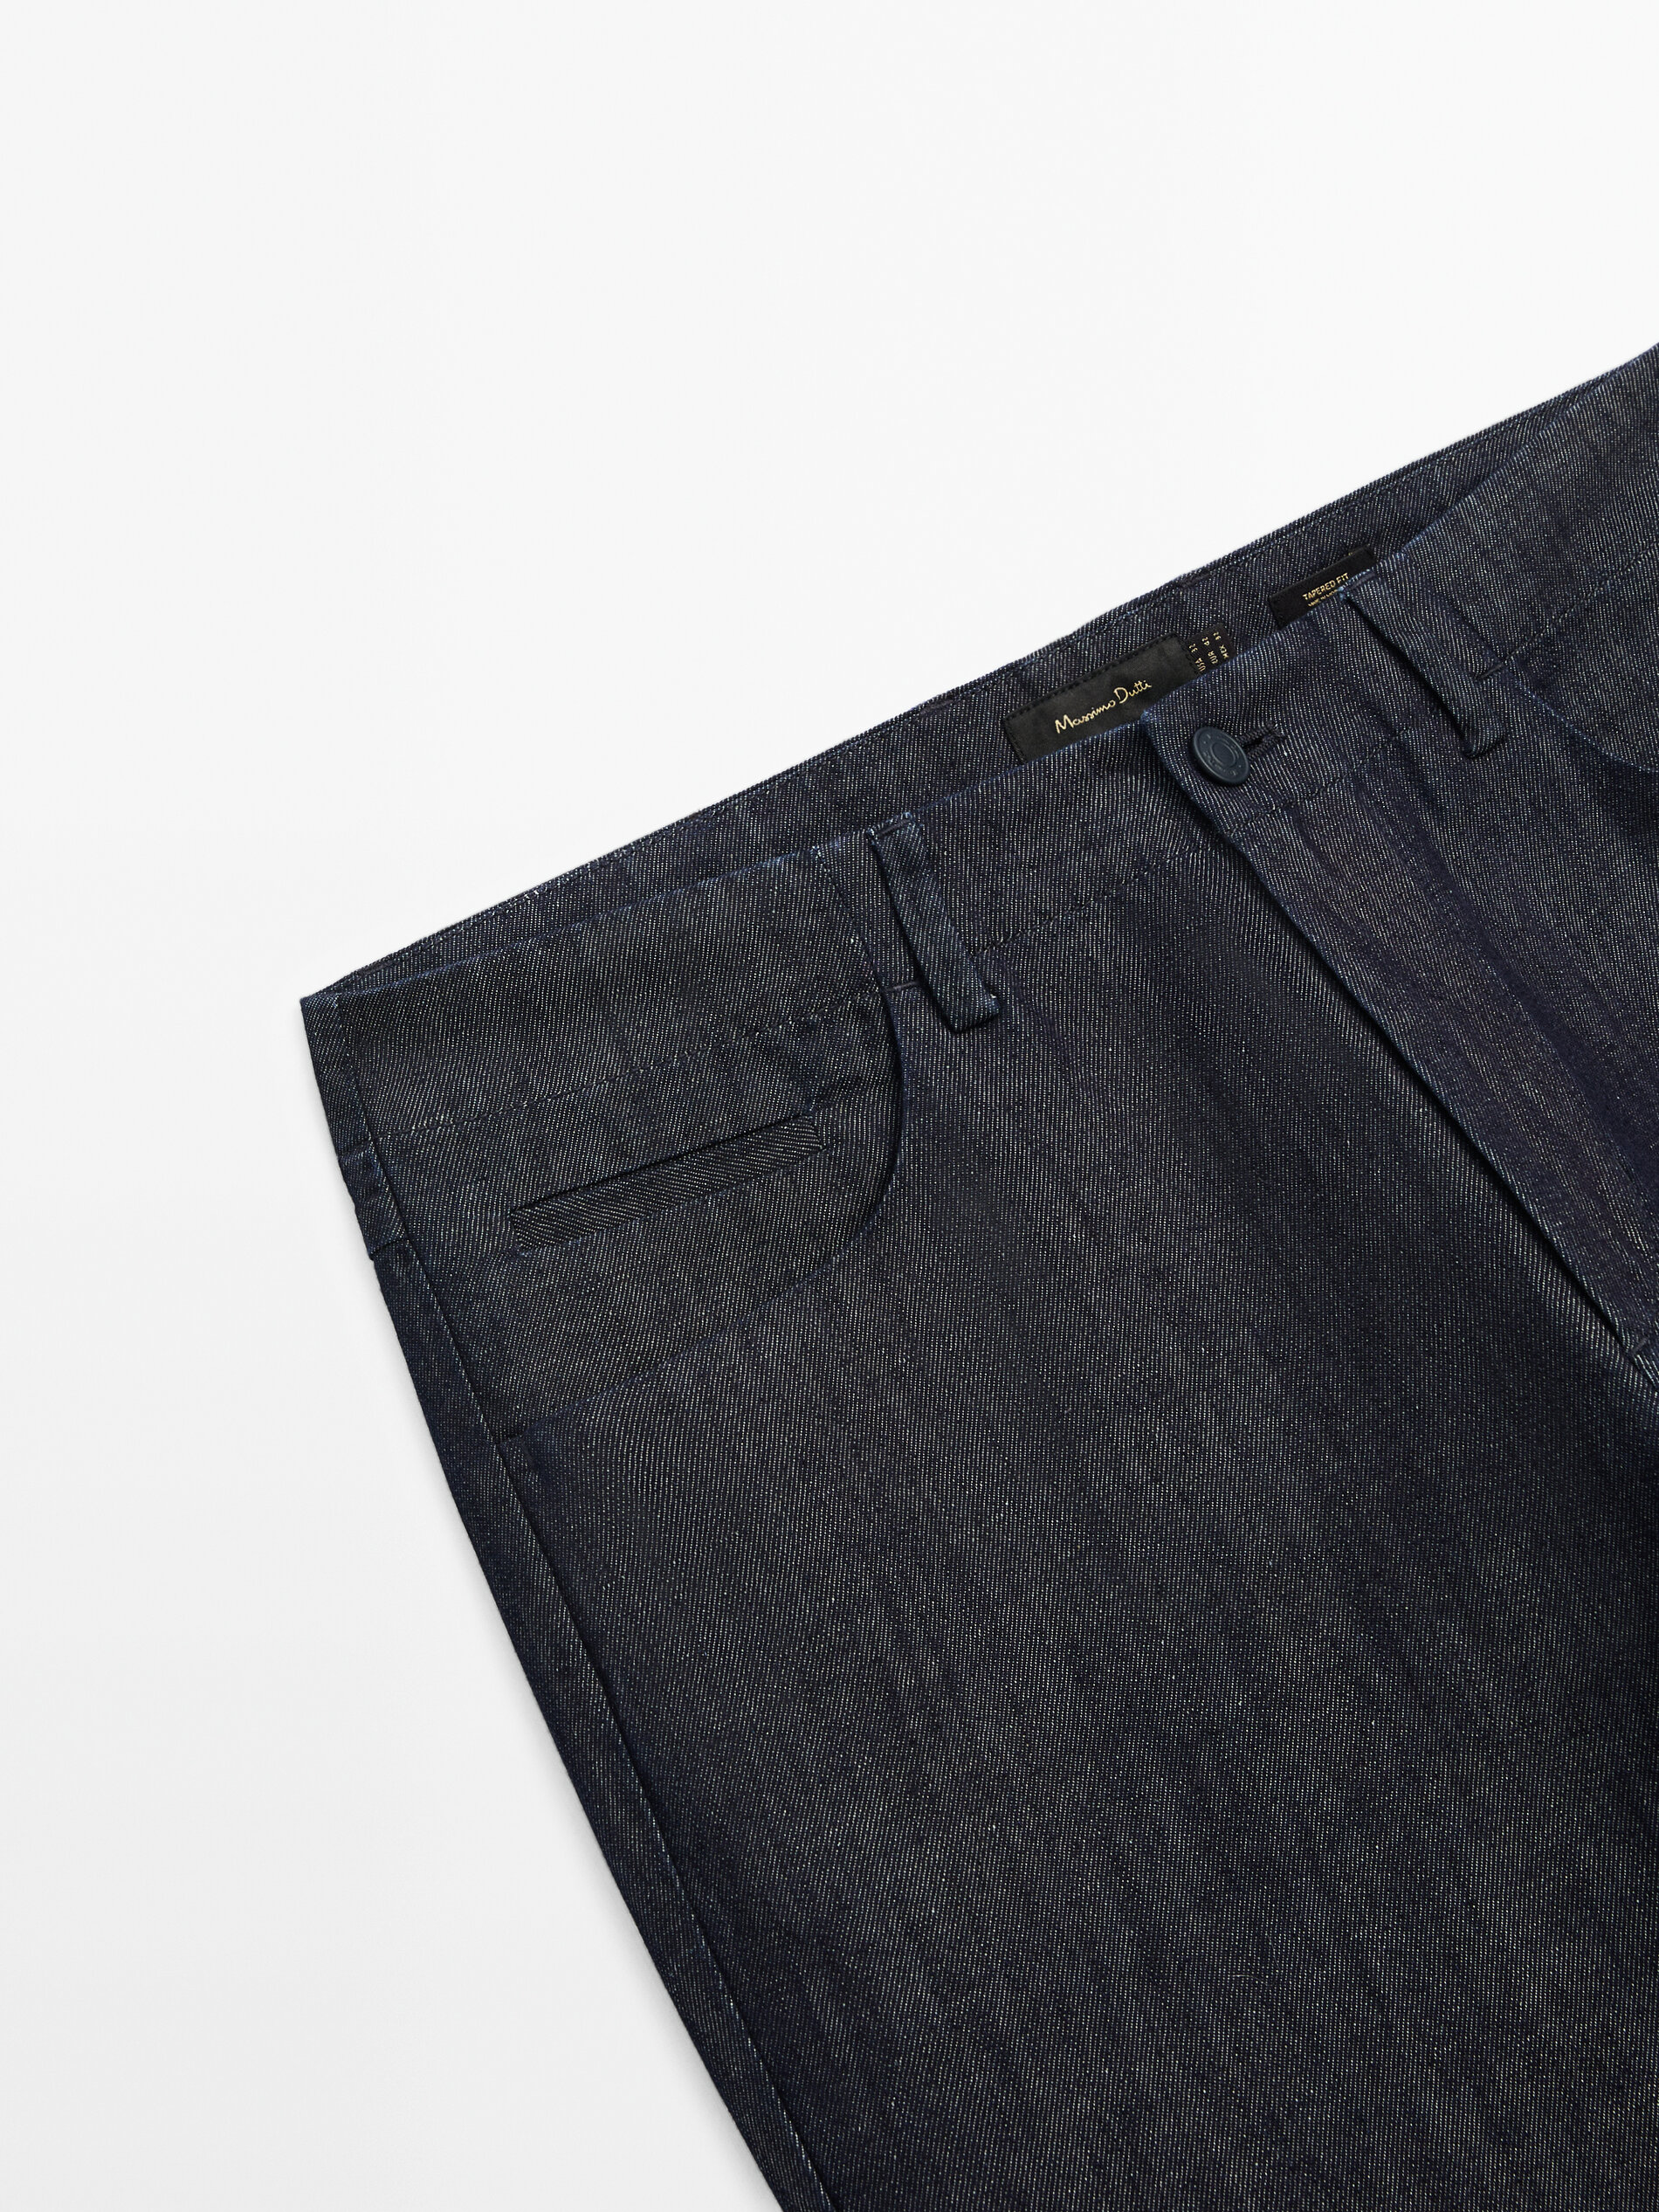 Jeans con algodón tapered fit